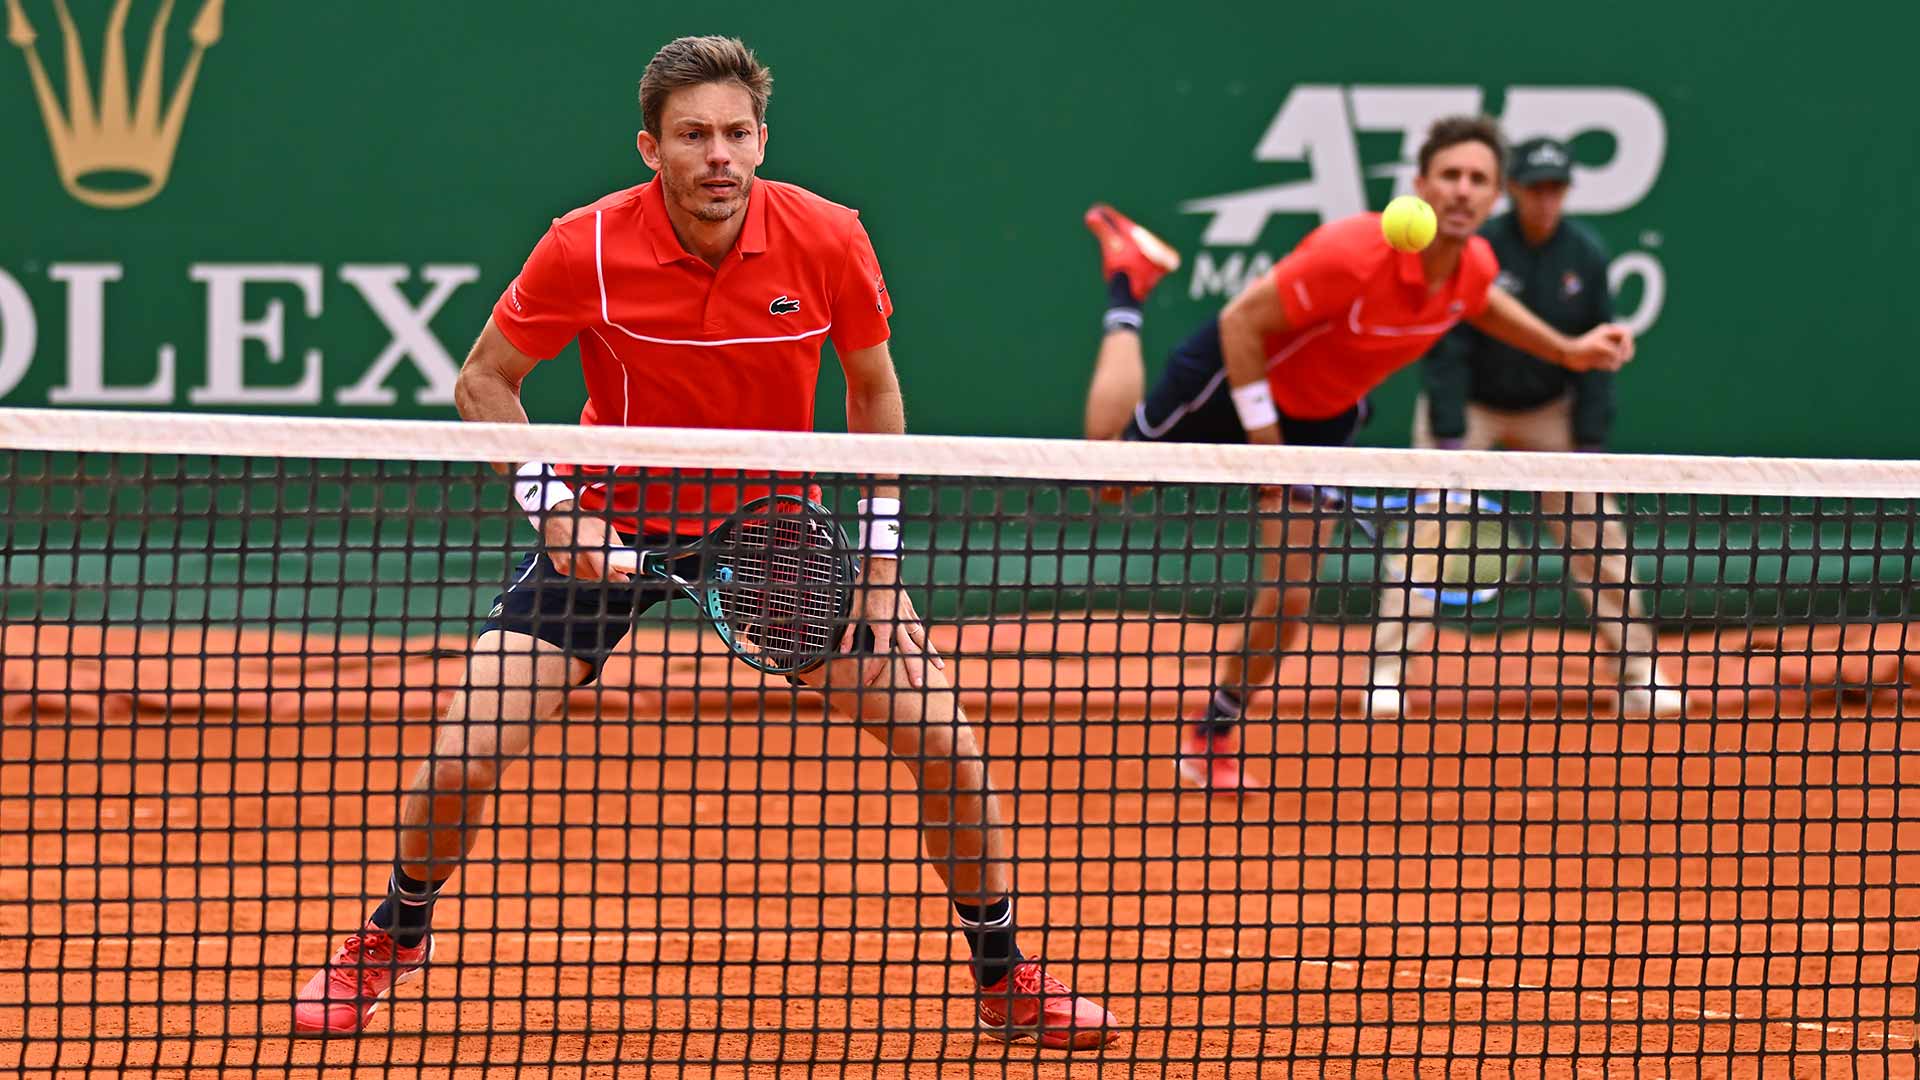 Nicolas Mahut and Edouard Roger-Vasselin in action Tuesday at the Rolex Monte-Carlo Masters.